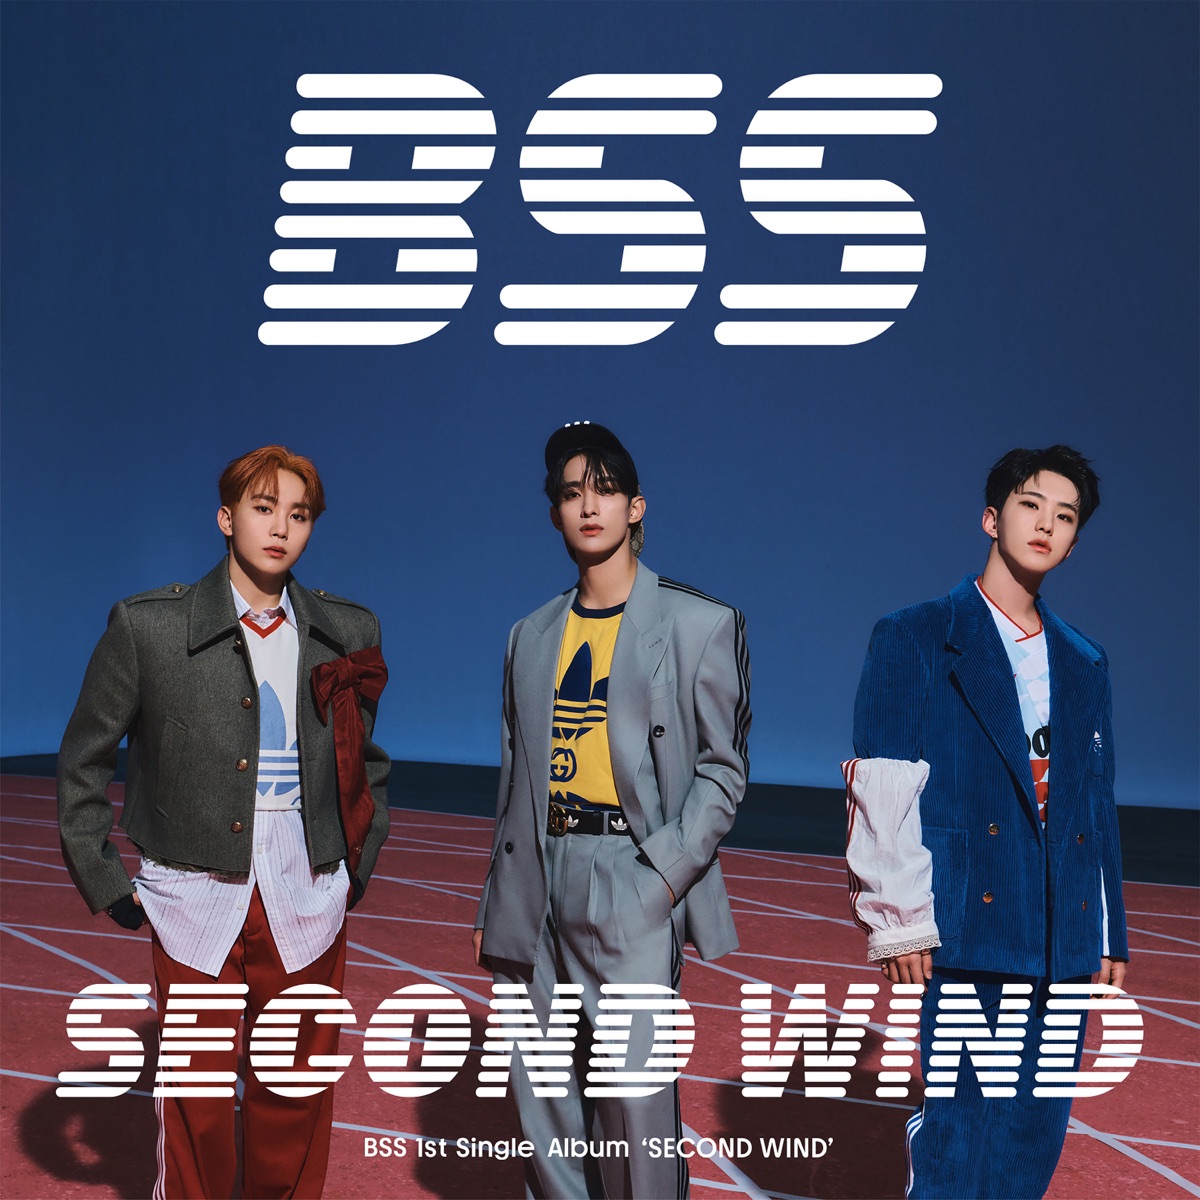 Cover art for『BSS (SEVENTEEN) - 7PM (feat. Peder Elias)』from the release『BSS 1st Single Album 'SECOND WIND'』